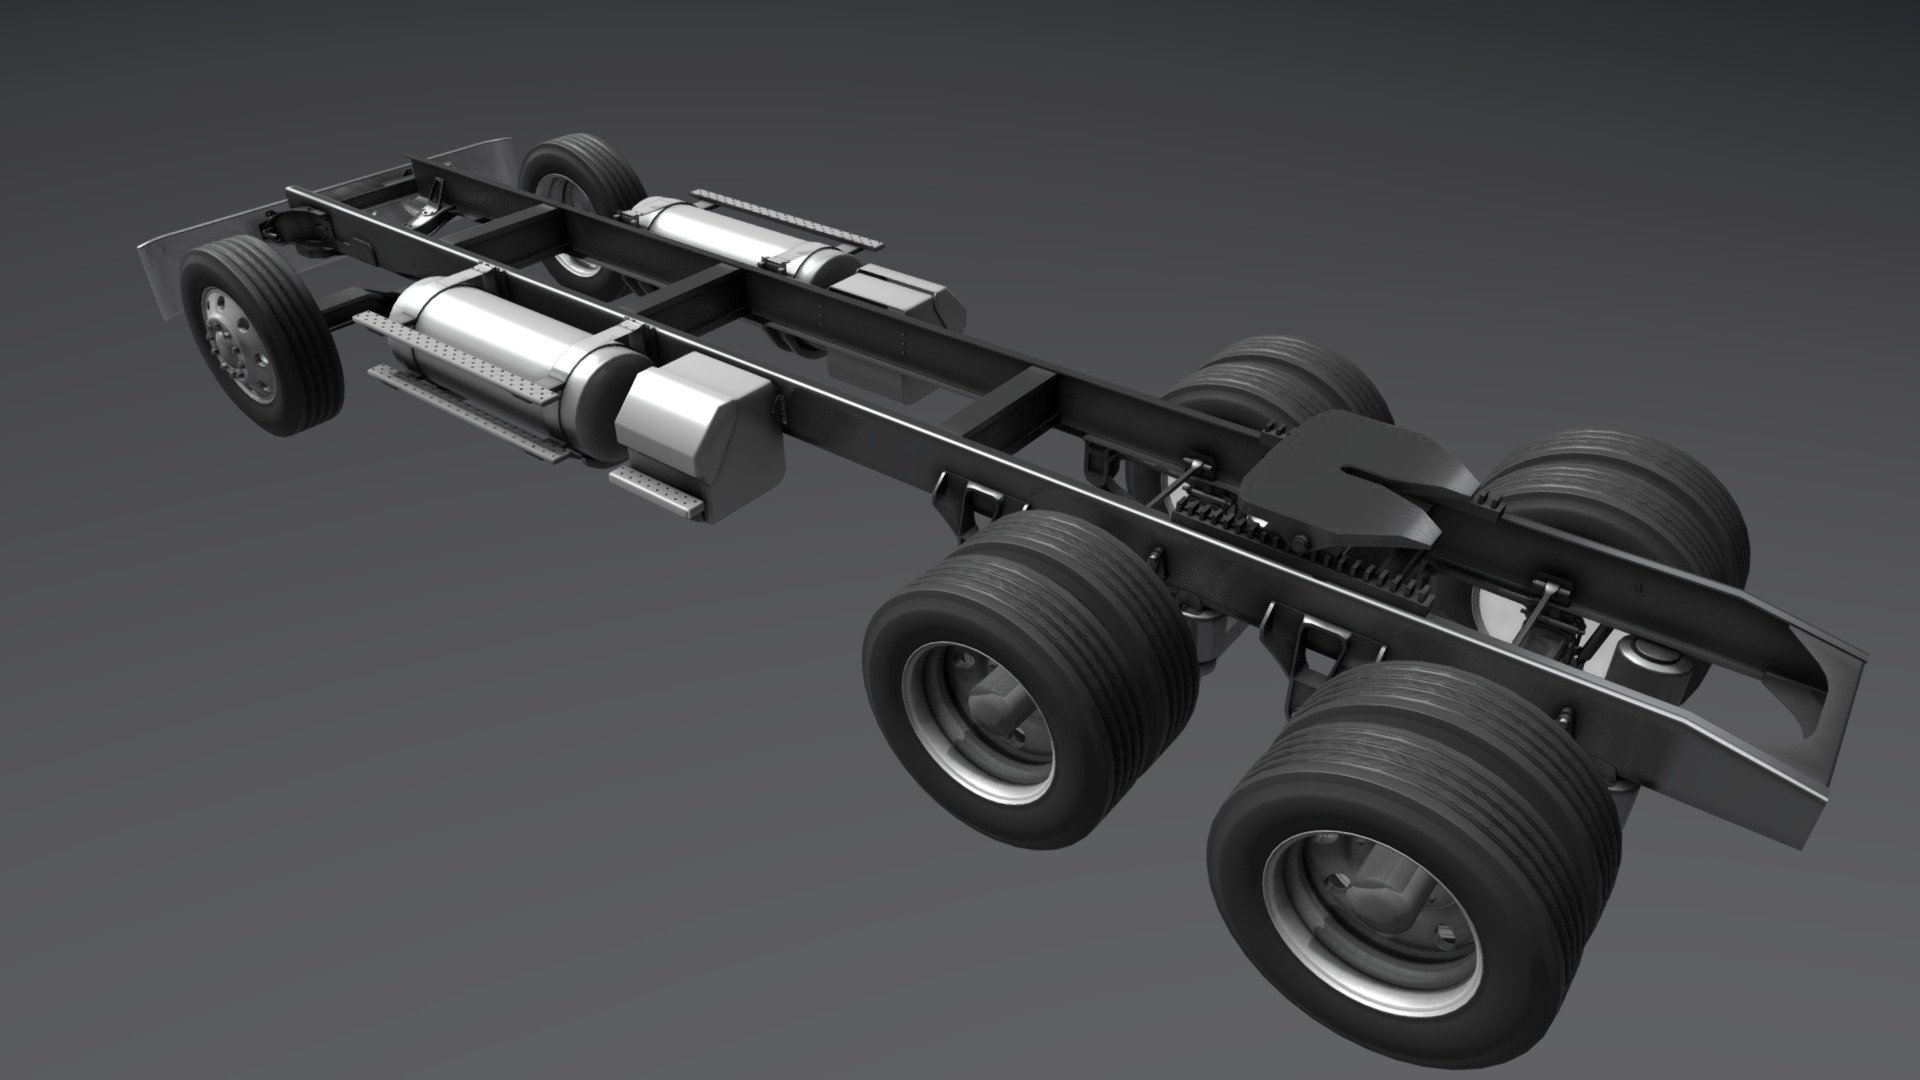 Main Chassis: Me
Tires: MrSteakPotato - semi truck chassis - 3D model by xtakedown 3d model